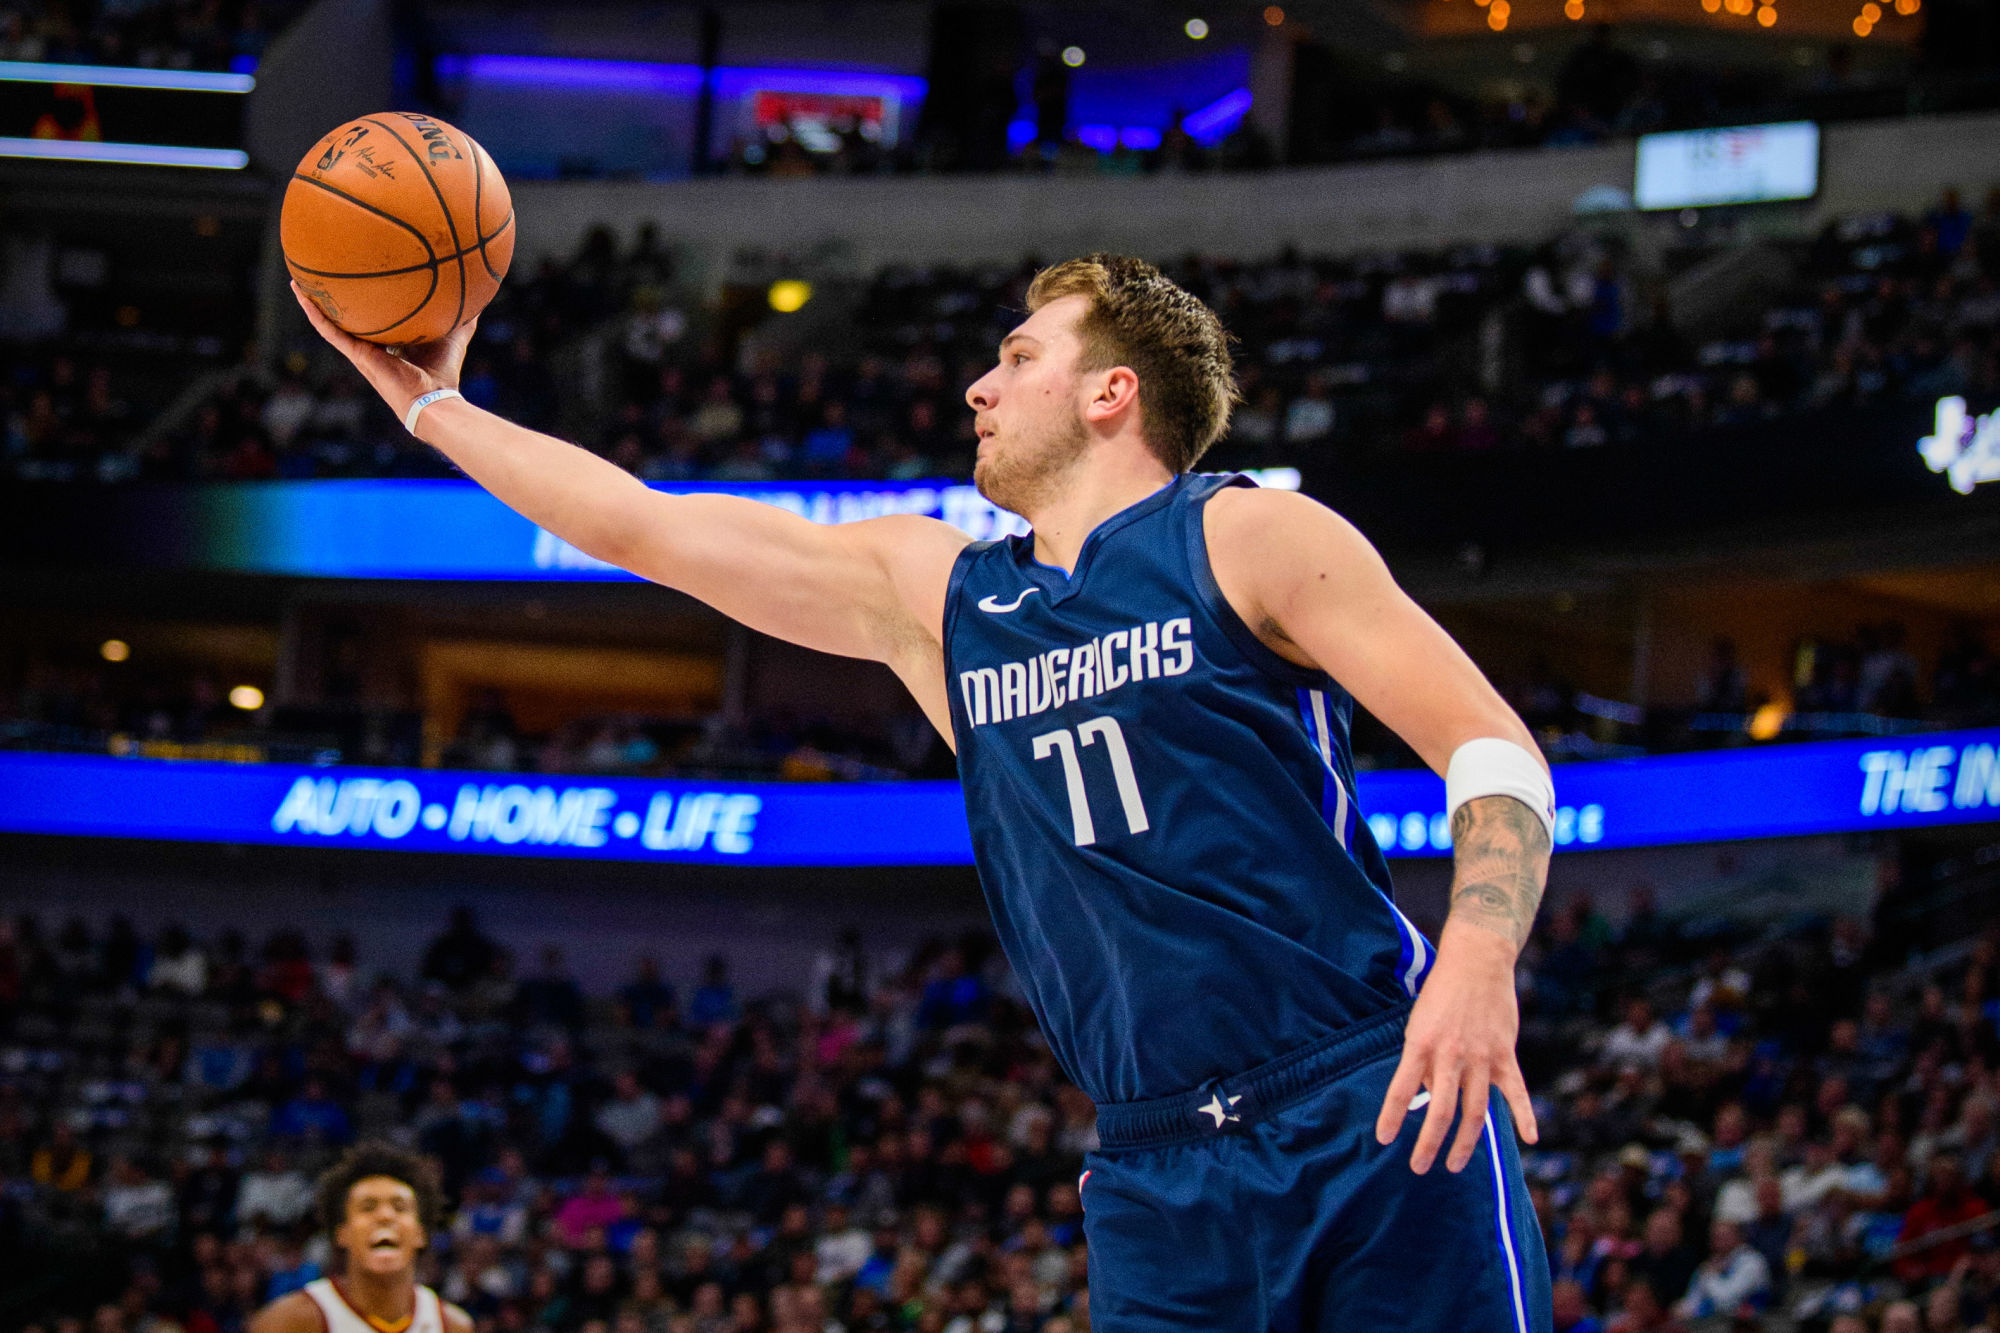 Nov 22, 2019; Dallas, TX, USA; Dallas Mavericks forward Luka Doncic (77) grabs a rebound during the first quarter against the Cleveland Cavaliers at the American Airlines Center. Mandatory Credit: Jerome Miron-USA TODAY Sports/Sipa USA 

Photo by Icon Sport - Luka DONCIC - American Airlines Center - Dallas (Etats Unis)